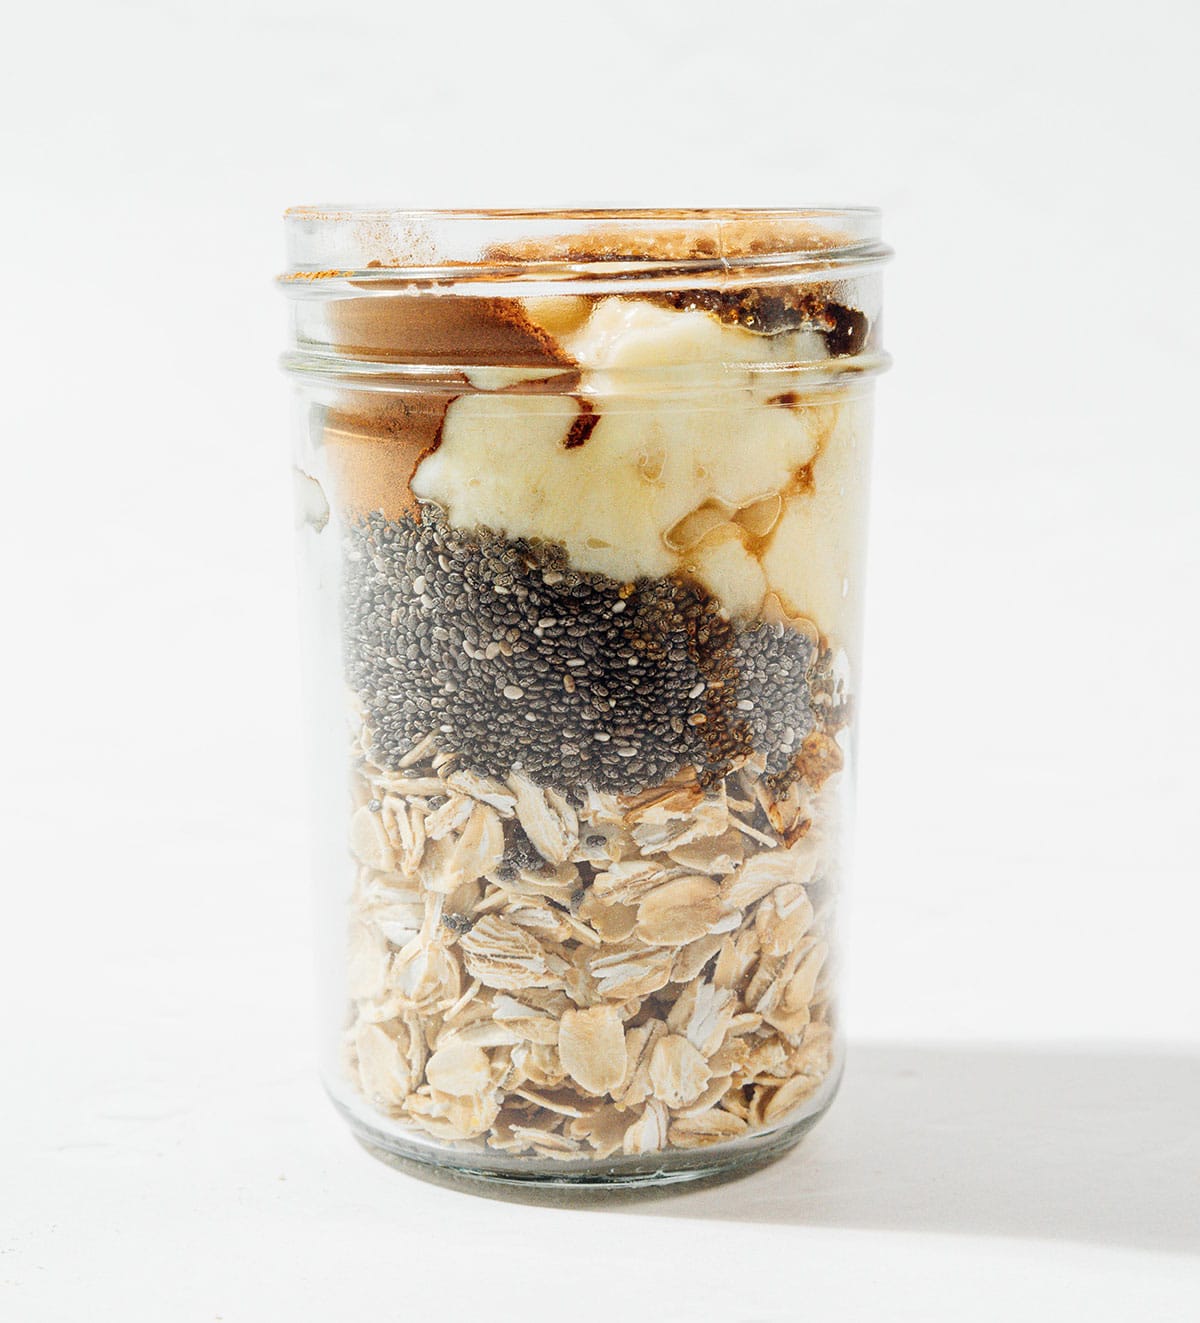 Ingredients for banana overnight oats in a jar.